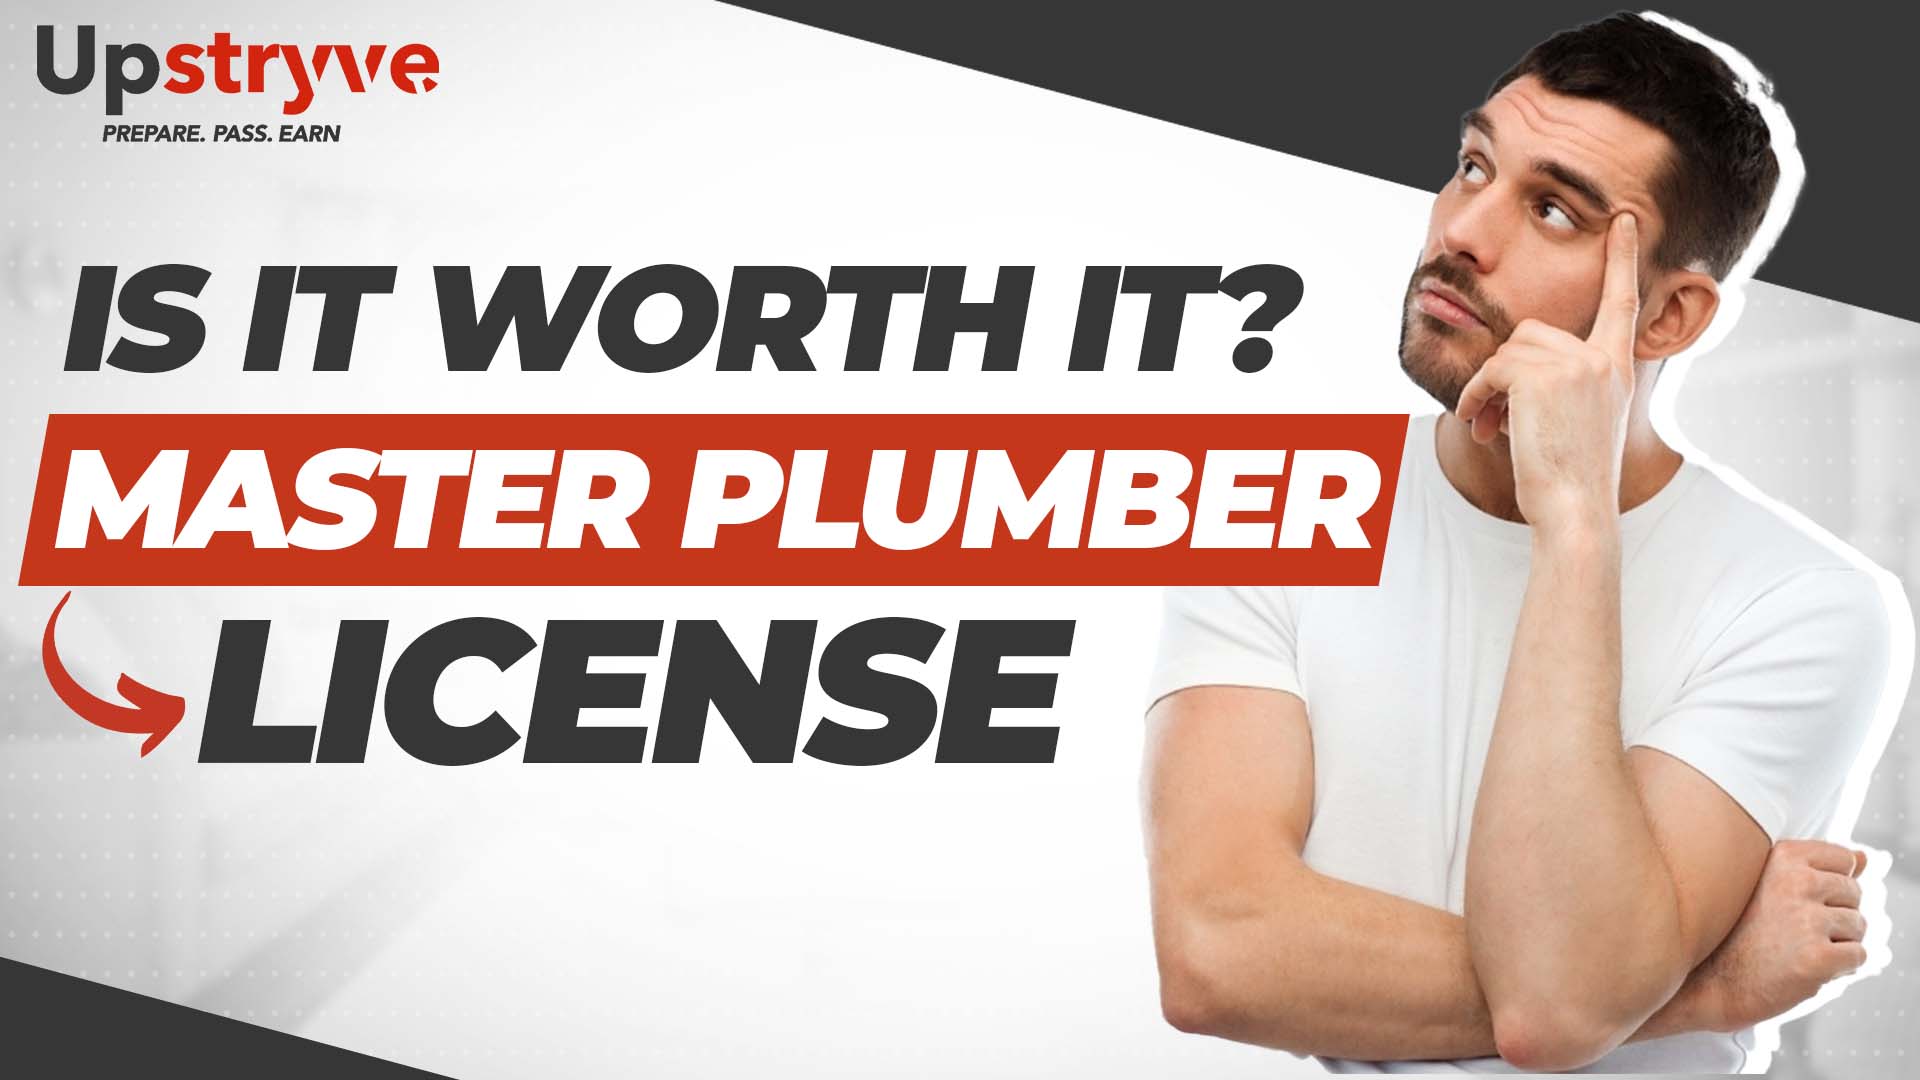 Should I become a Master Plumber? This was one of the many questions we had on this months webinar featuring Thomas Hicken. During our webinar many people had great questions about the business of plumbing and how exactly to start and scale. After becoming a Journeyman Plumber and getting some experience your next logical step would be to get your Master Plumbers license. However, Thomas gives some great reasons to first consider all your options. Let us know what you think about becoming a Master Plumber in the comments below.